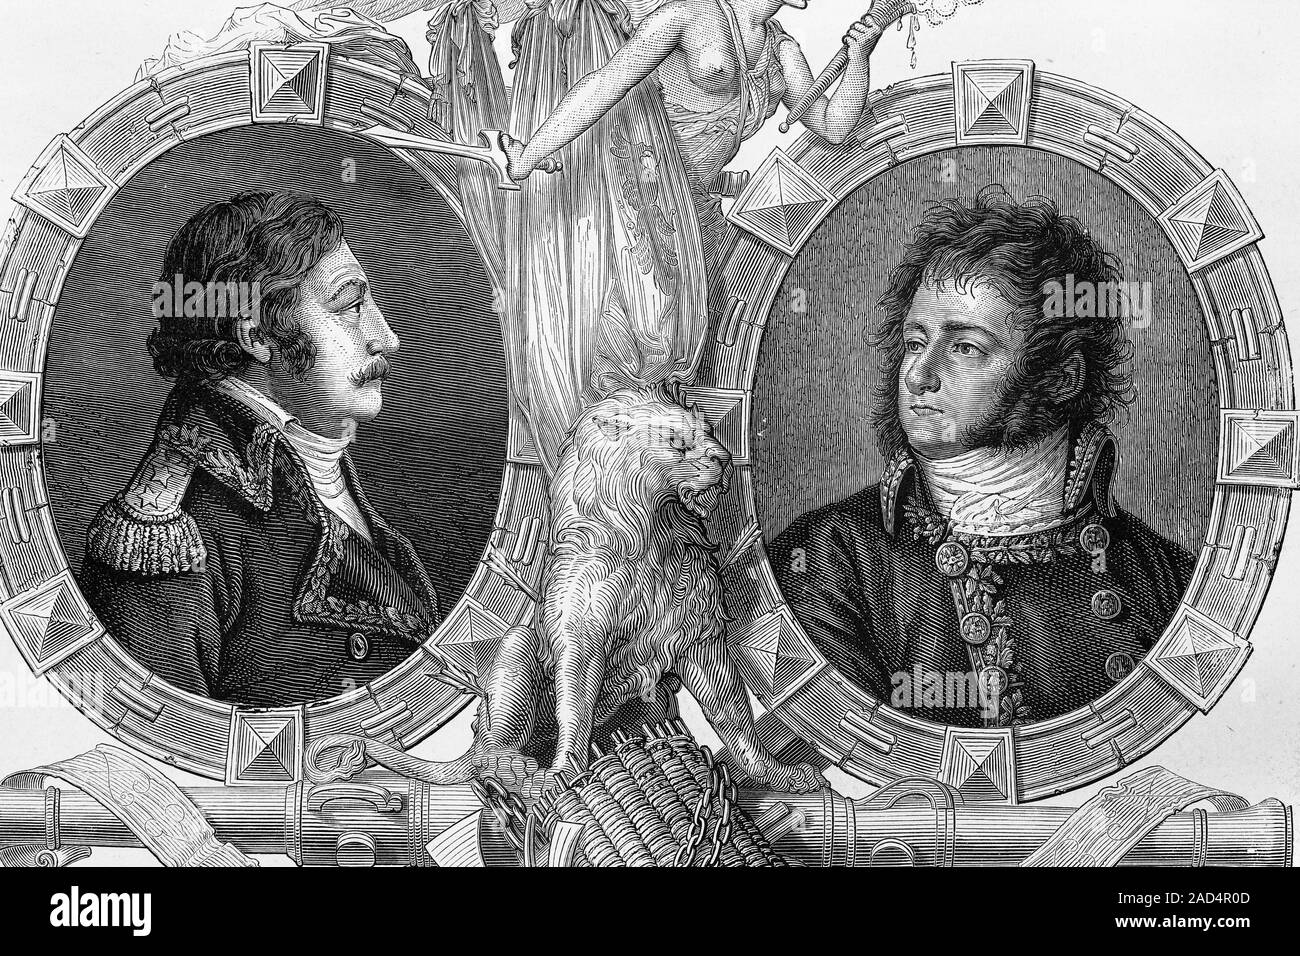 Jean antoine Black and White Stock Photos & Images - Alamy